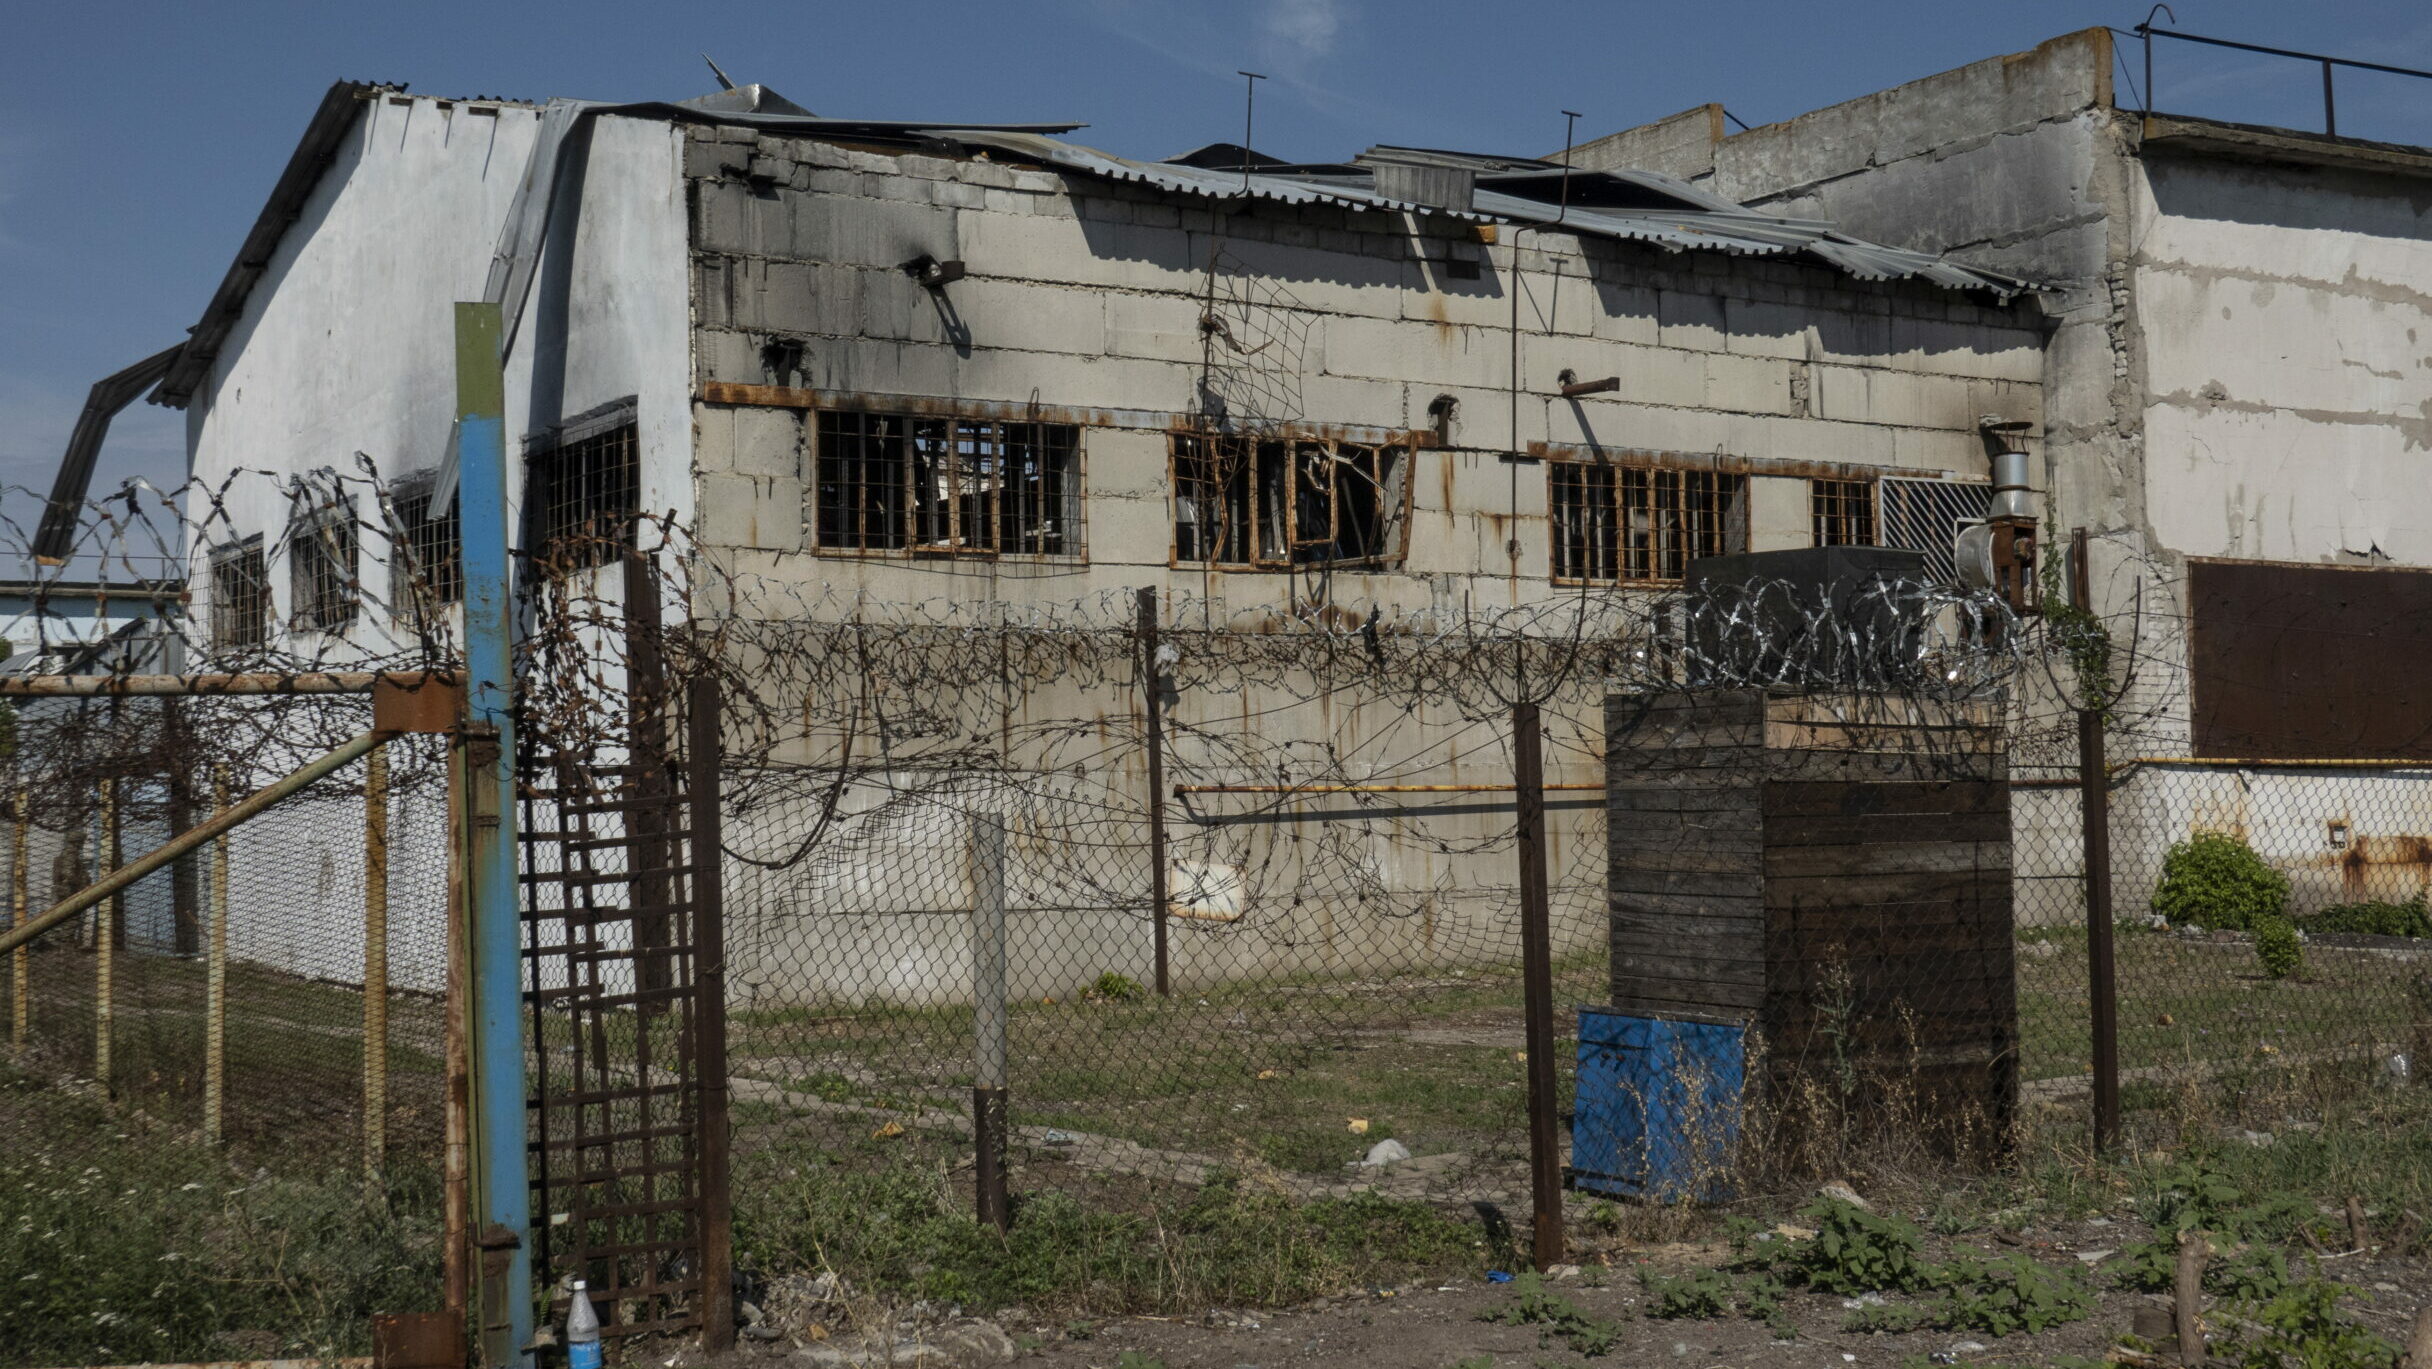 The pre-trial detention center in Yelenovka shelling